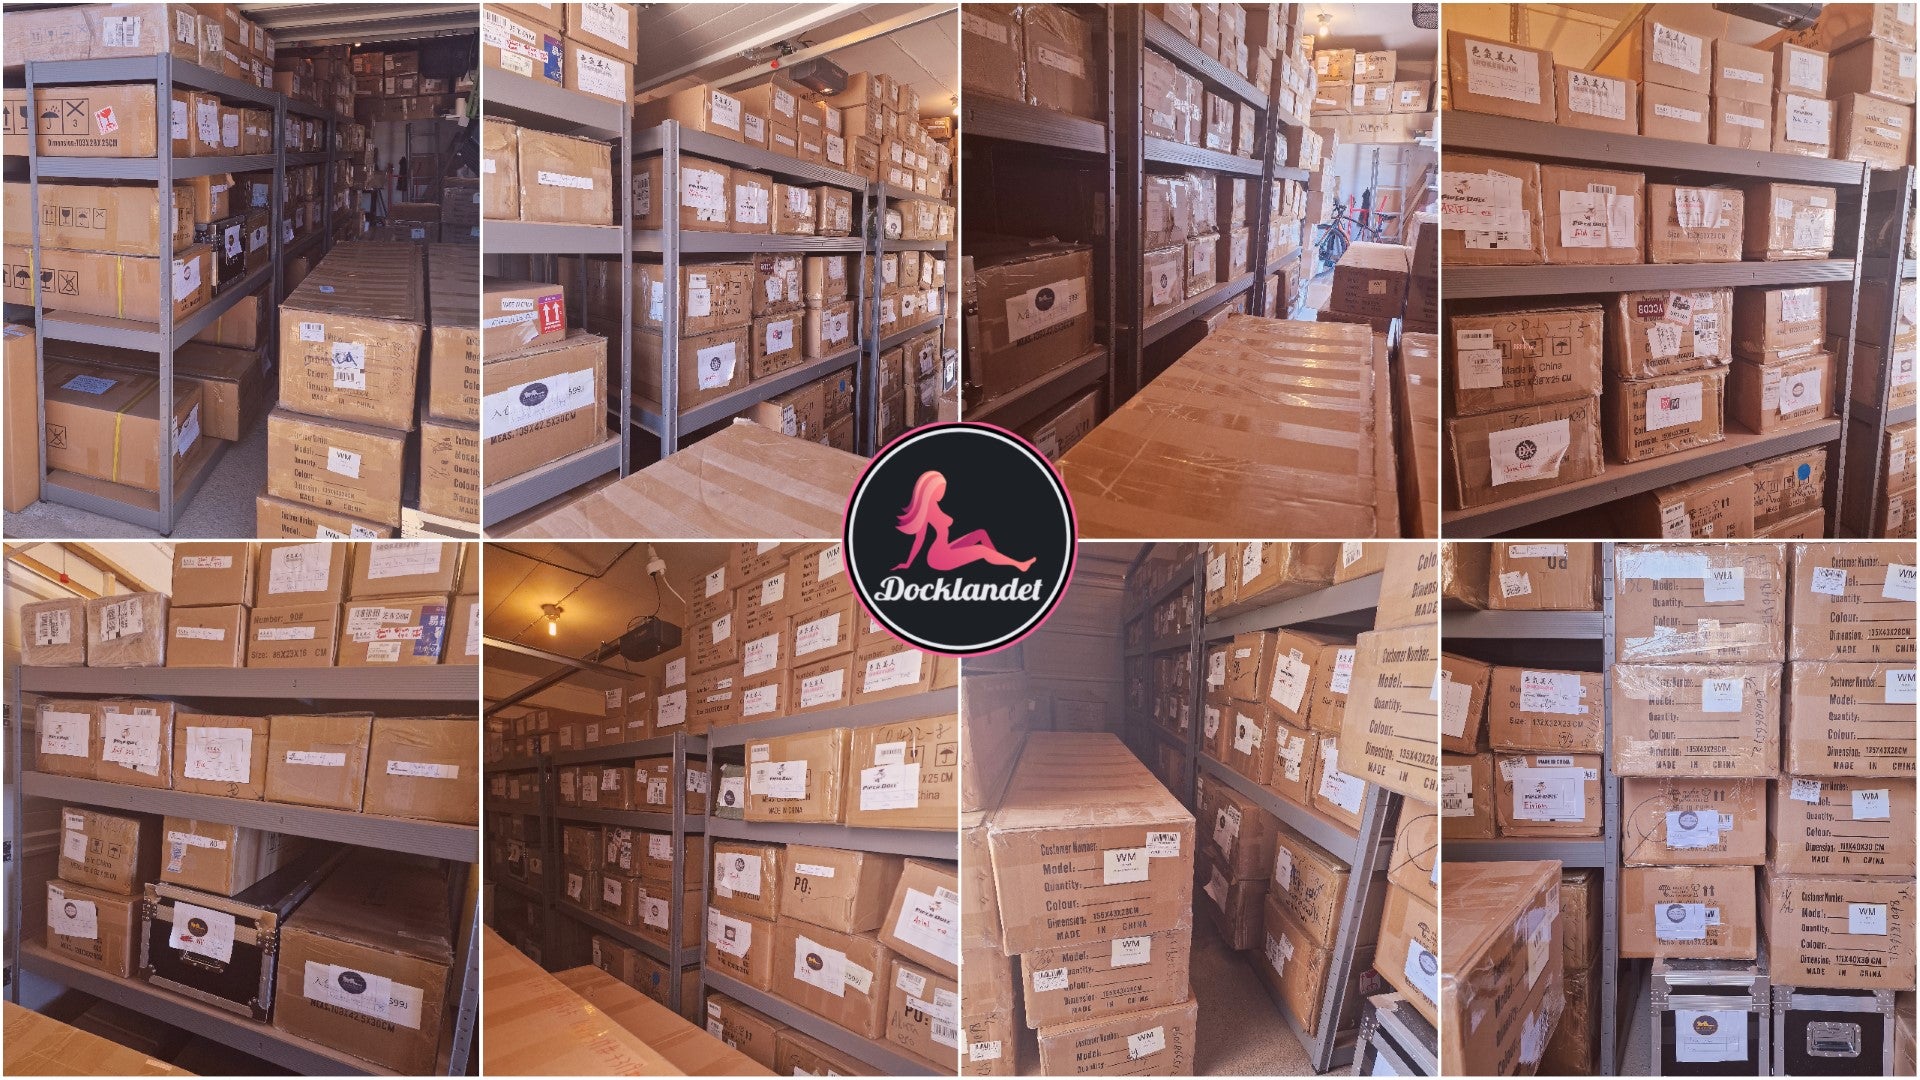 Download your sex doll at Dockland's warehouse in Borlänge. The picture shows several packaged sex dolls and the Dockland logo in the middle.